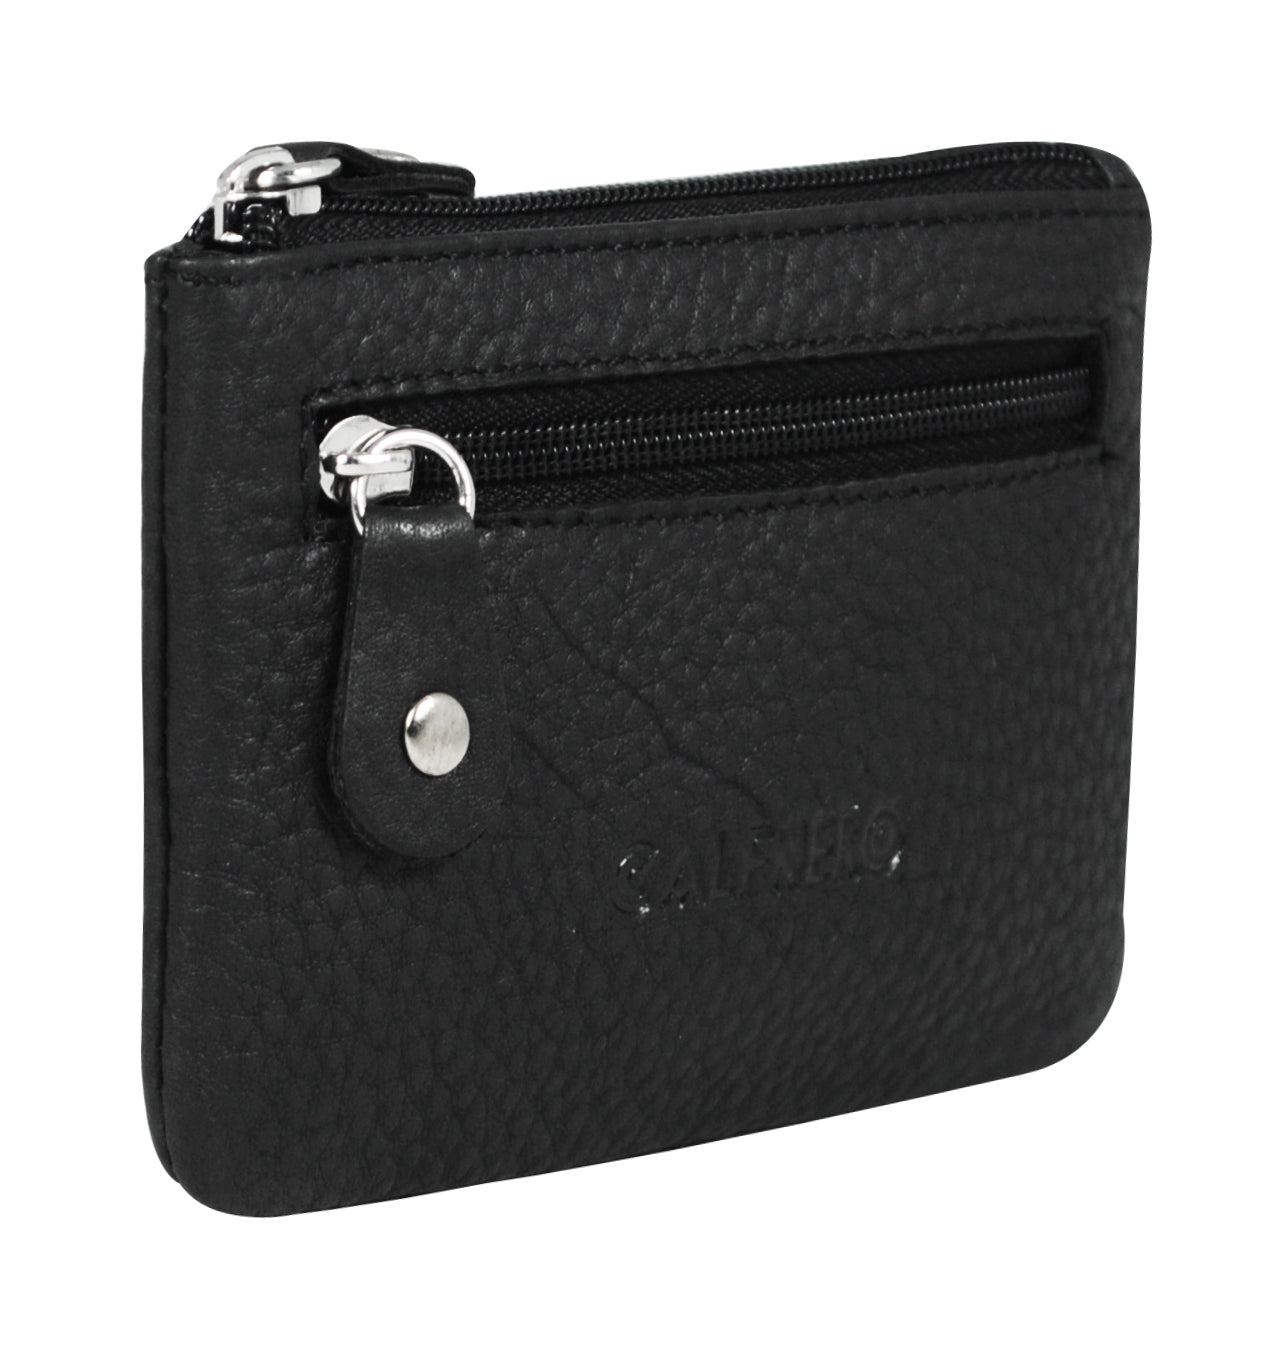 Genuine Leather Key Case,Coin Purse-key & coin holder (1589-Black)